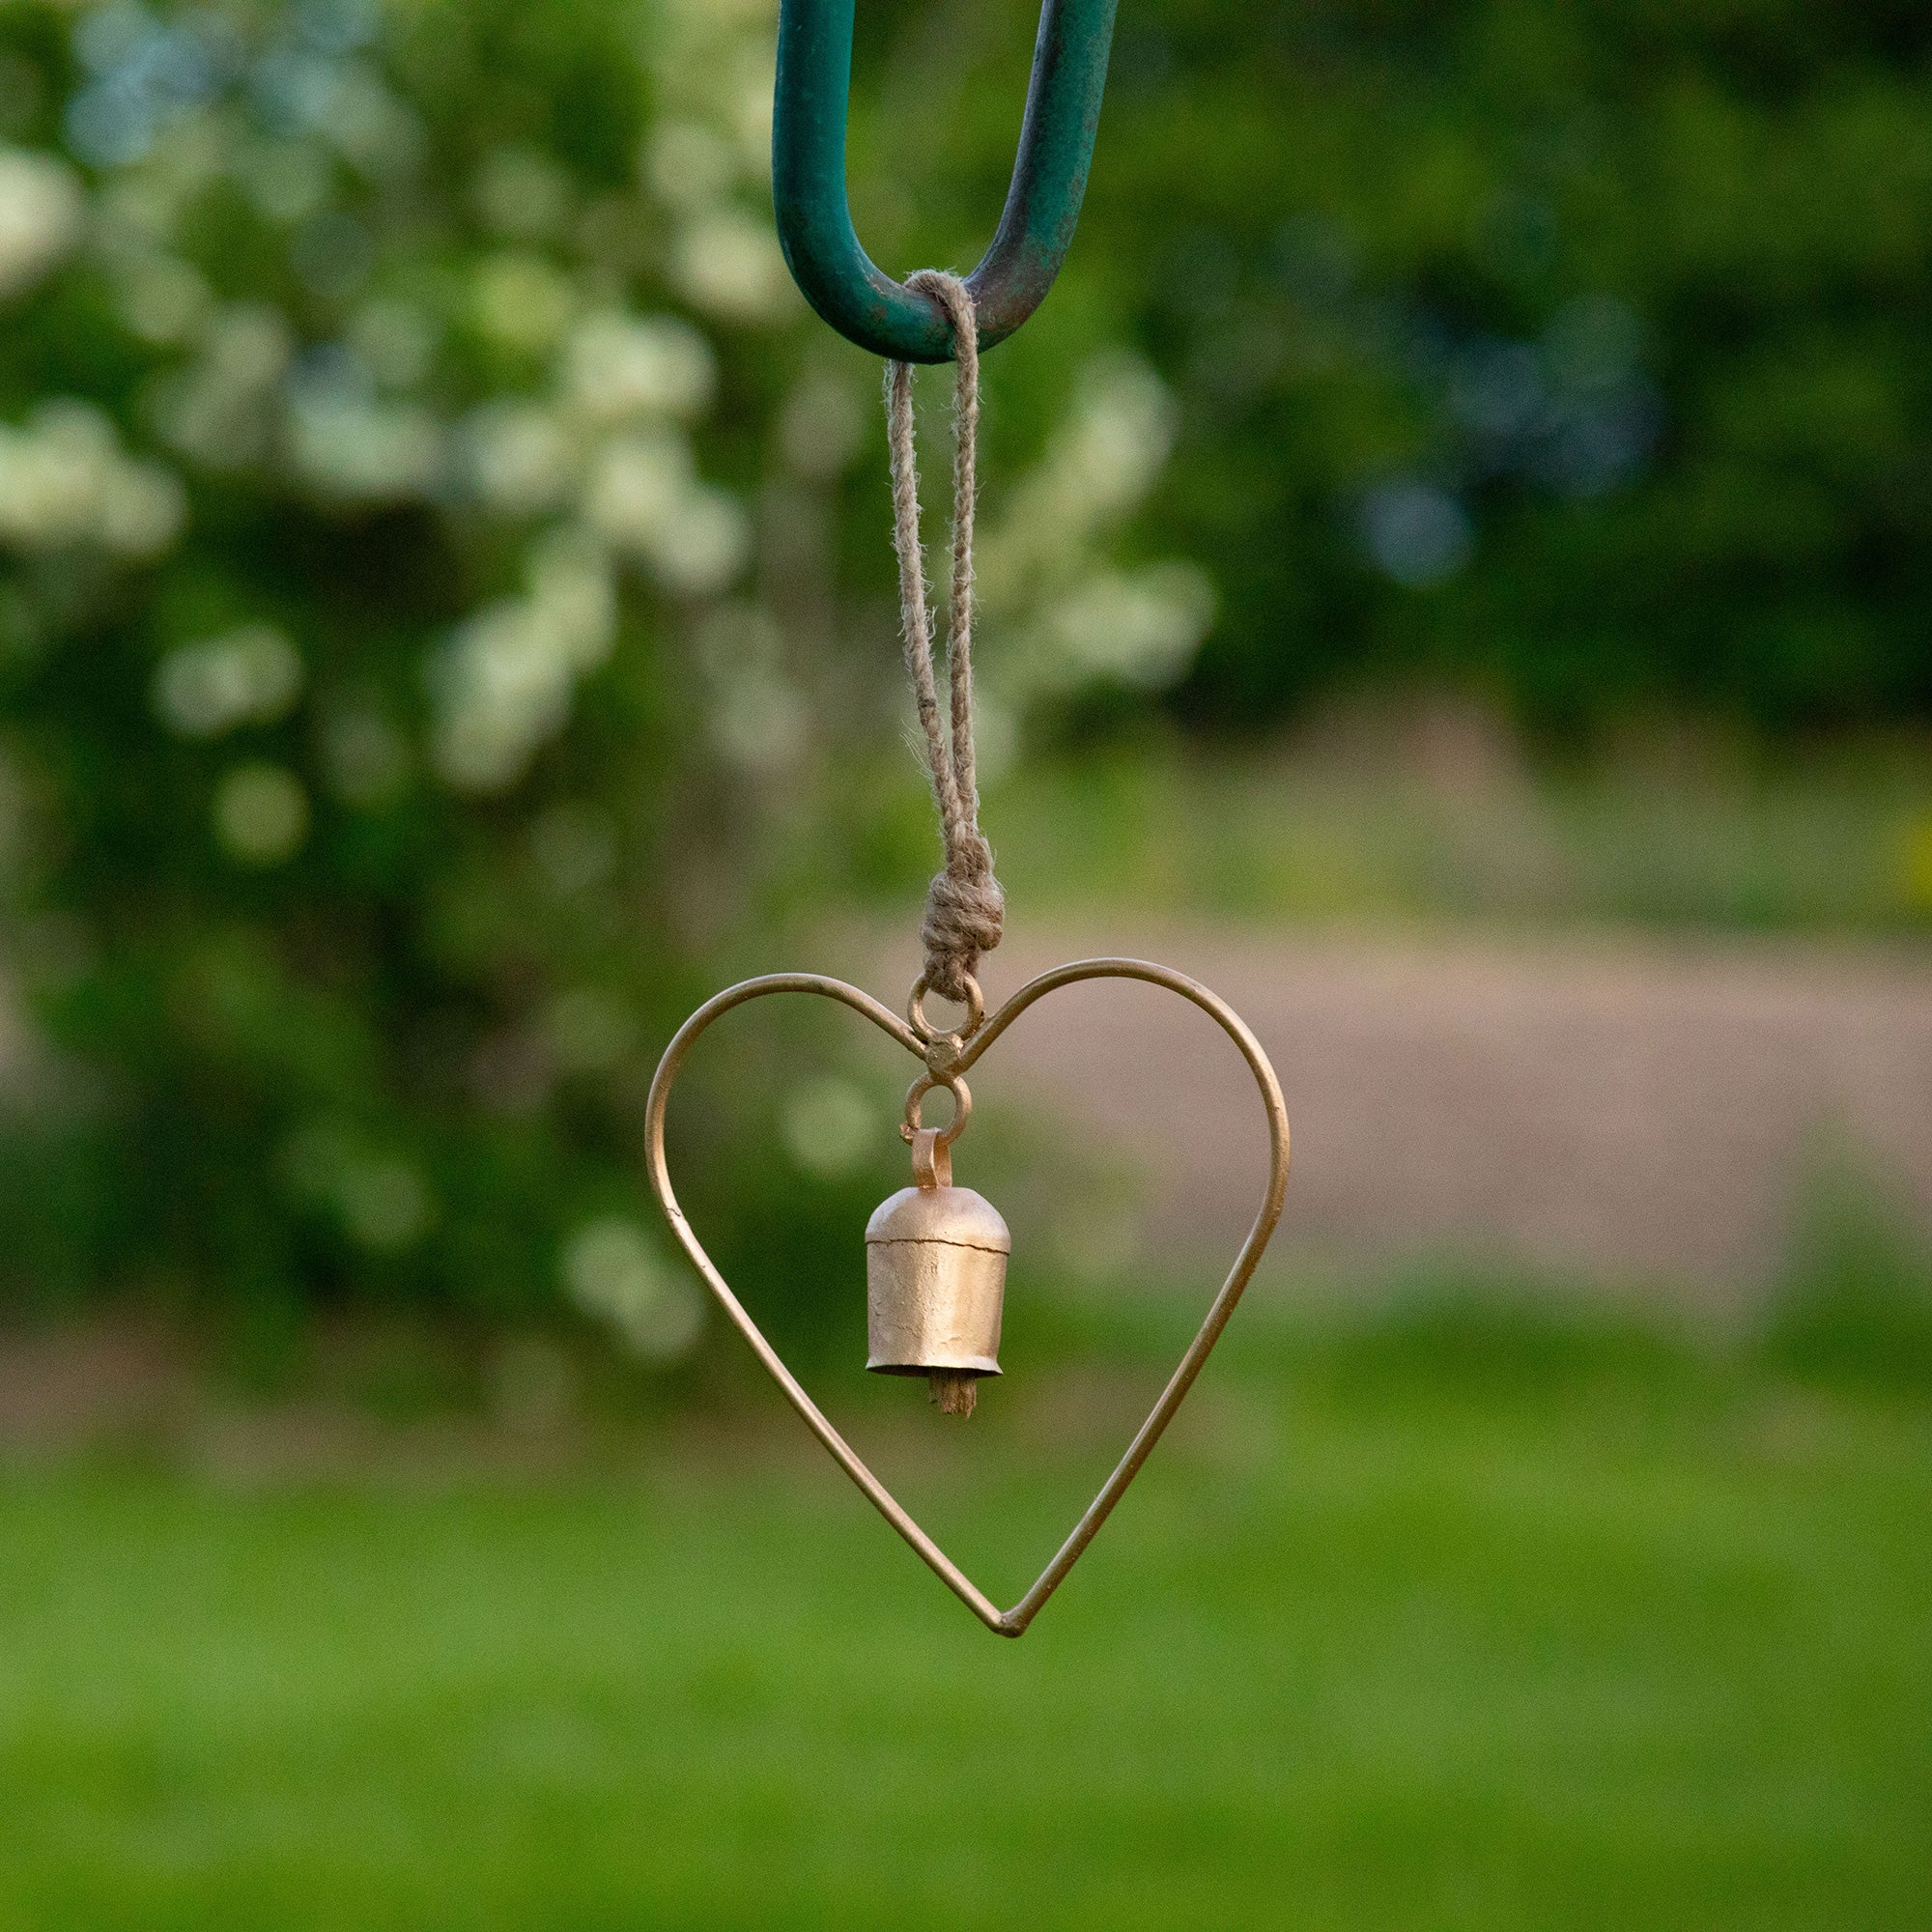 Single Bell Iron Wind Chime - Heart